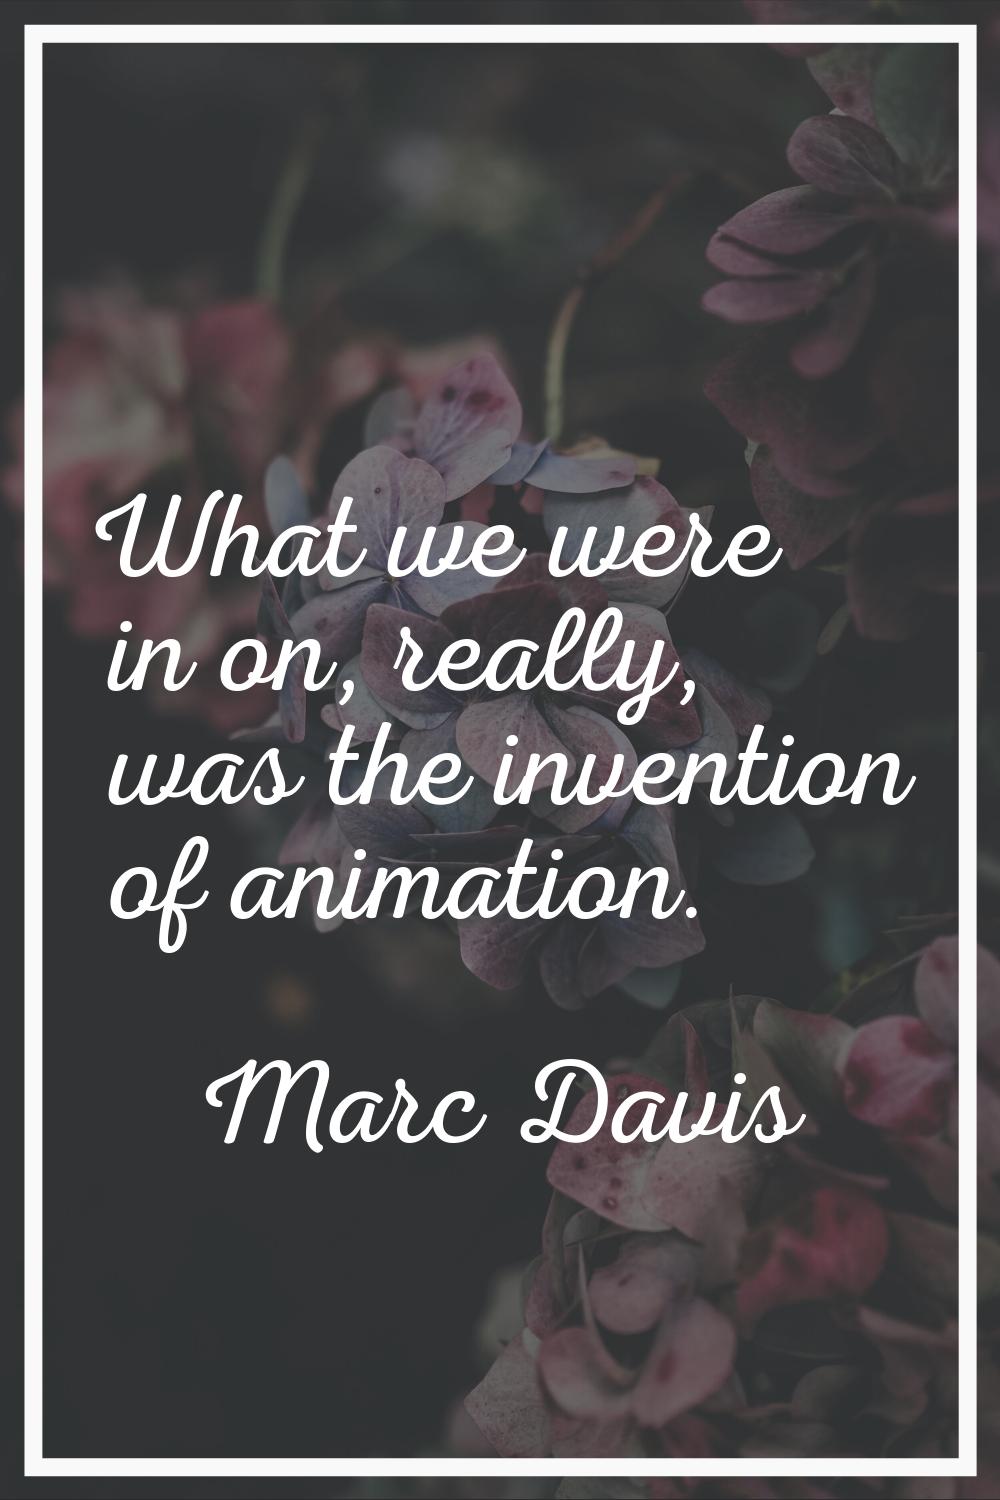 What we were in on, really, was the invention of animation.